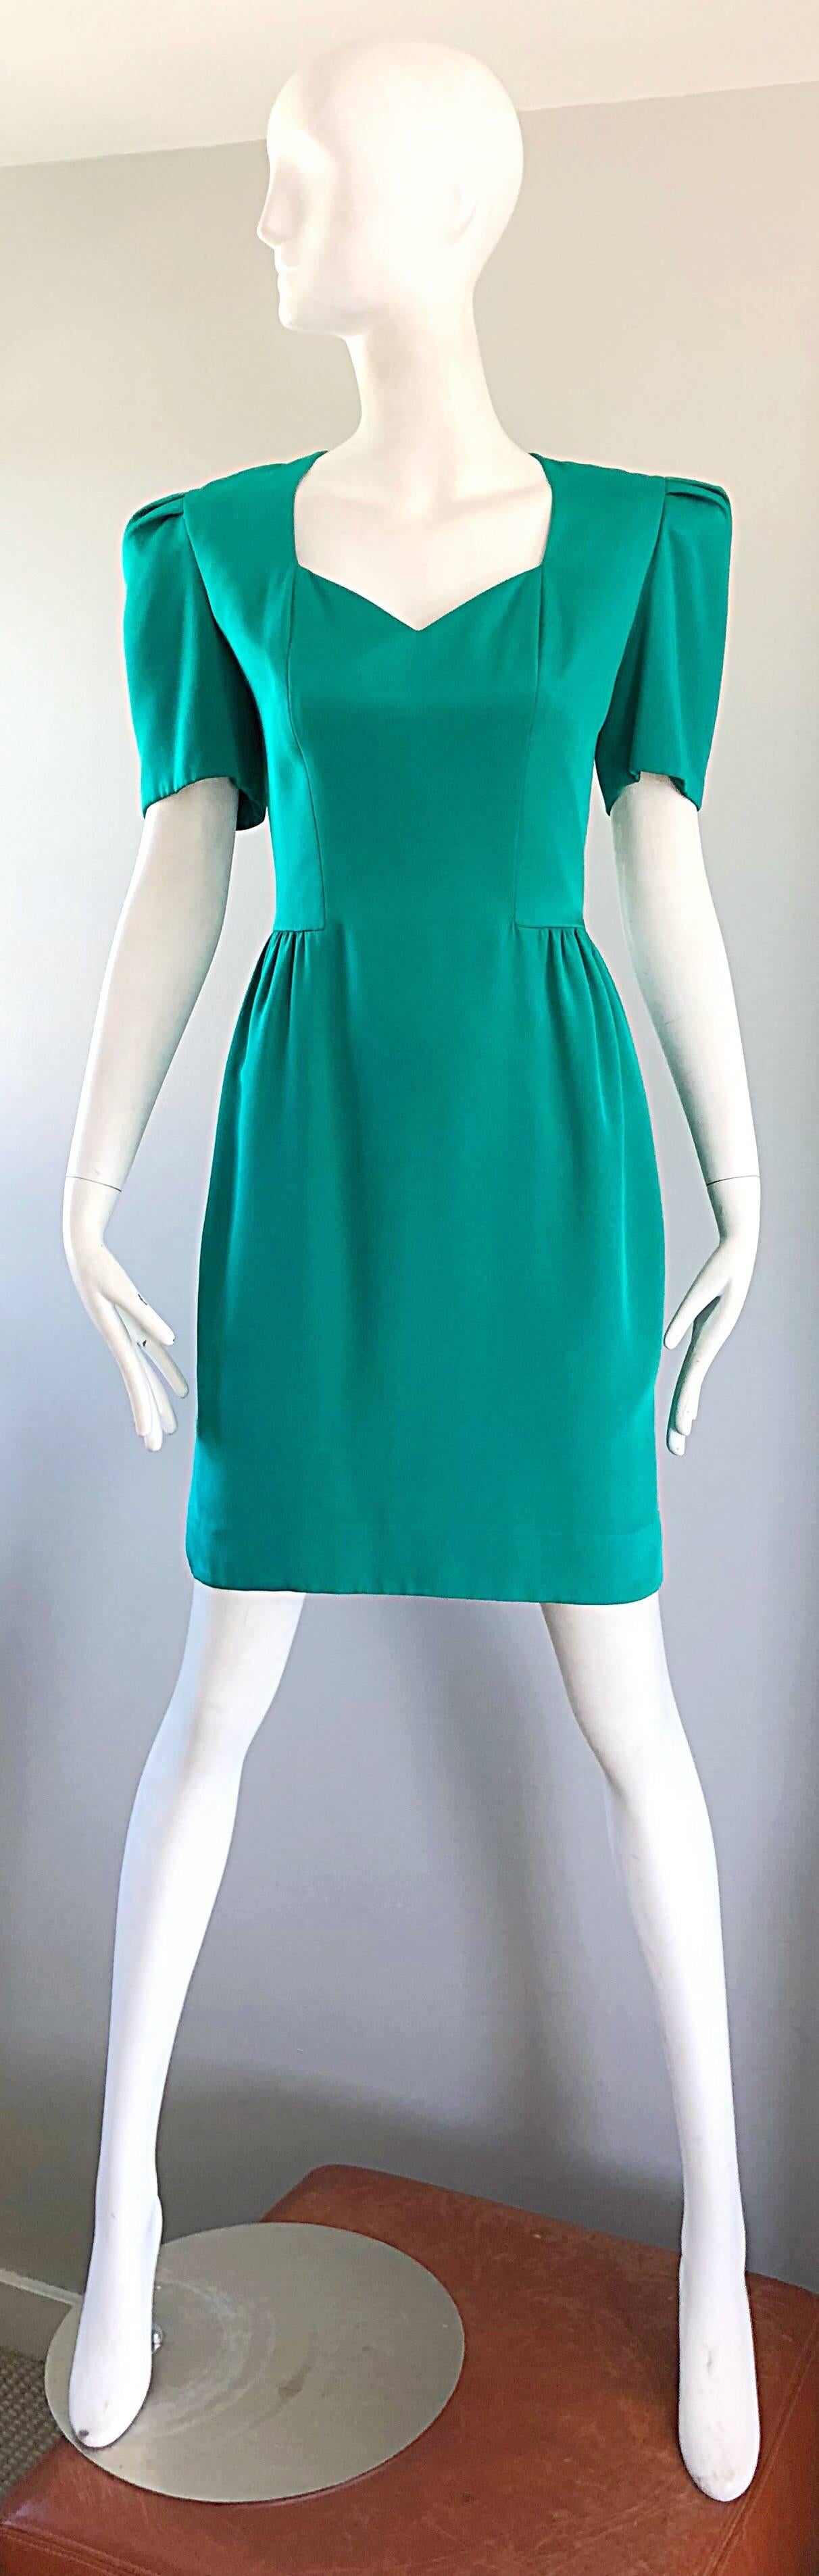 Beautiful vintage late 80s CAROLINA HERRERA kelly green strong shoulder short sleeve dress! Striking vibrant kelly green color. Built in shoulder pads offer just the right amount of drama (this beauty looks like it could be off the current runways